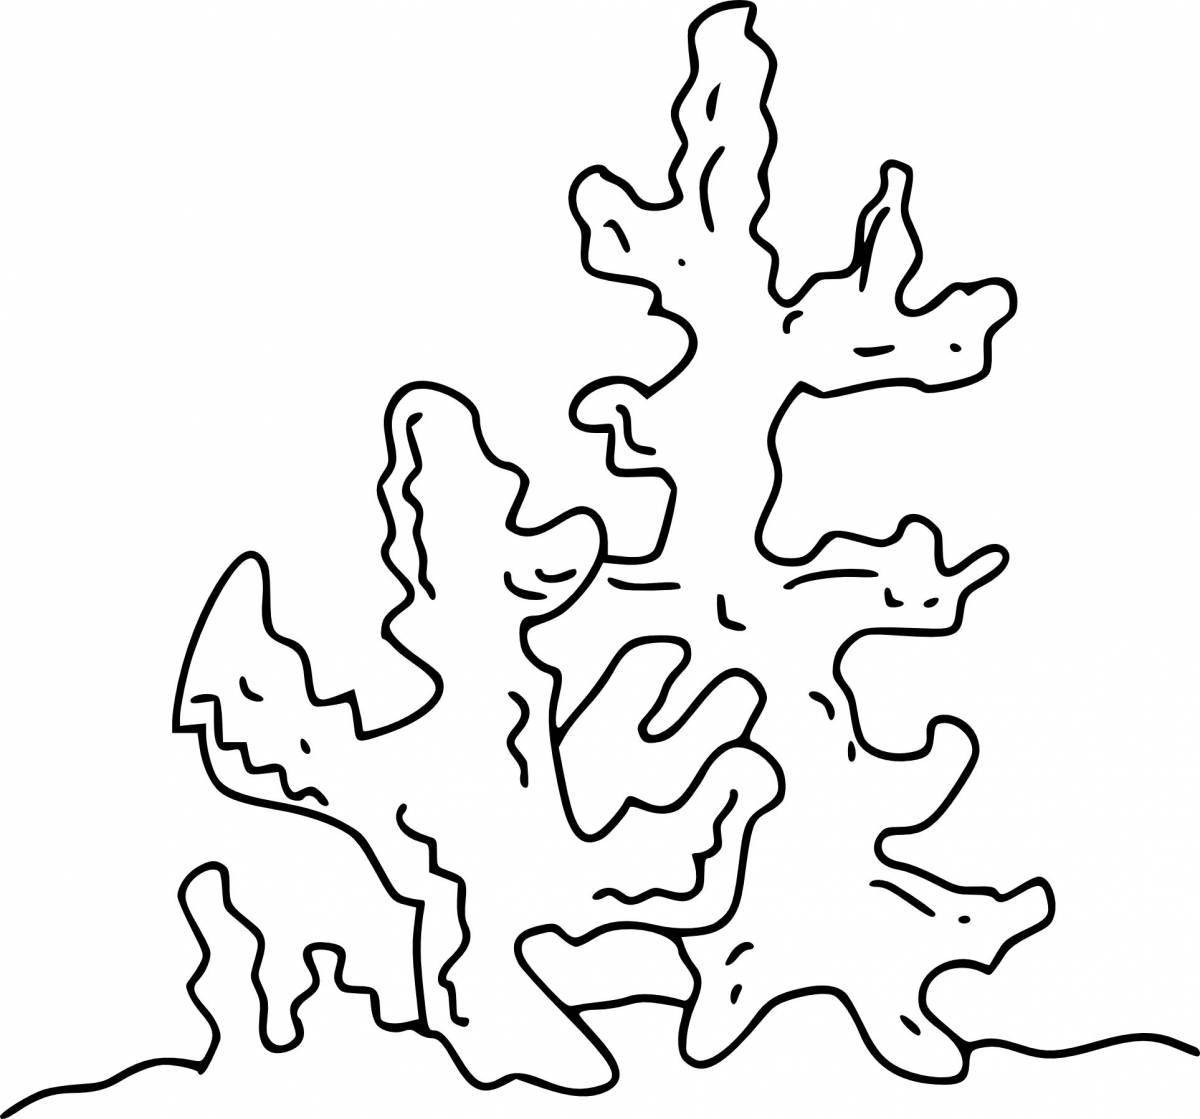 Coloured algae coloring pages for children